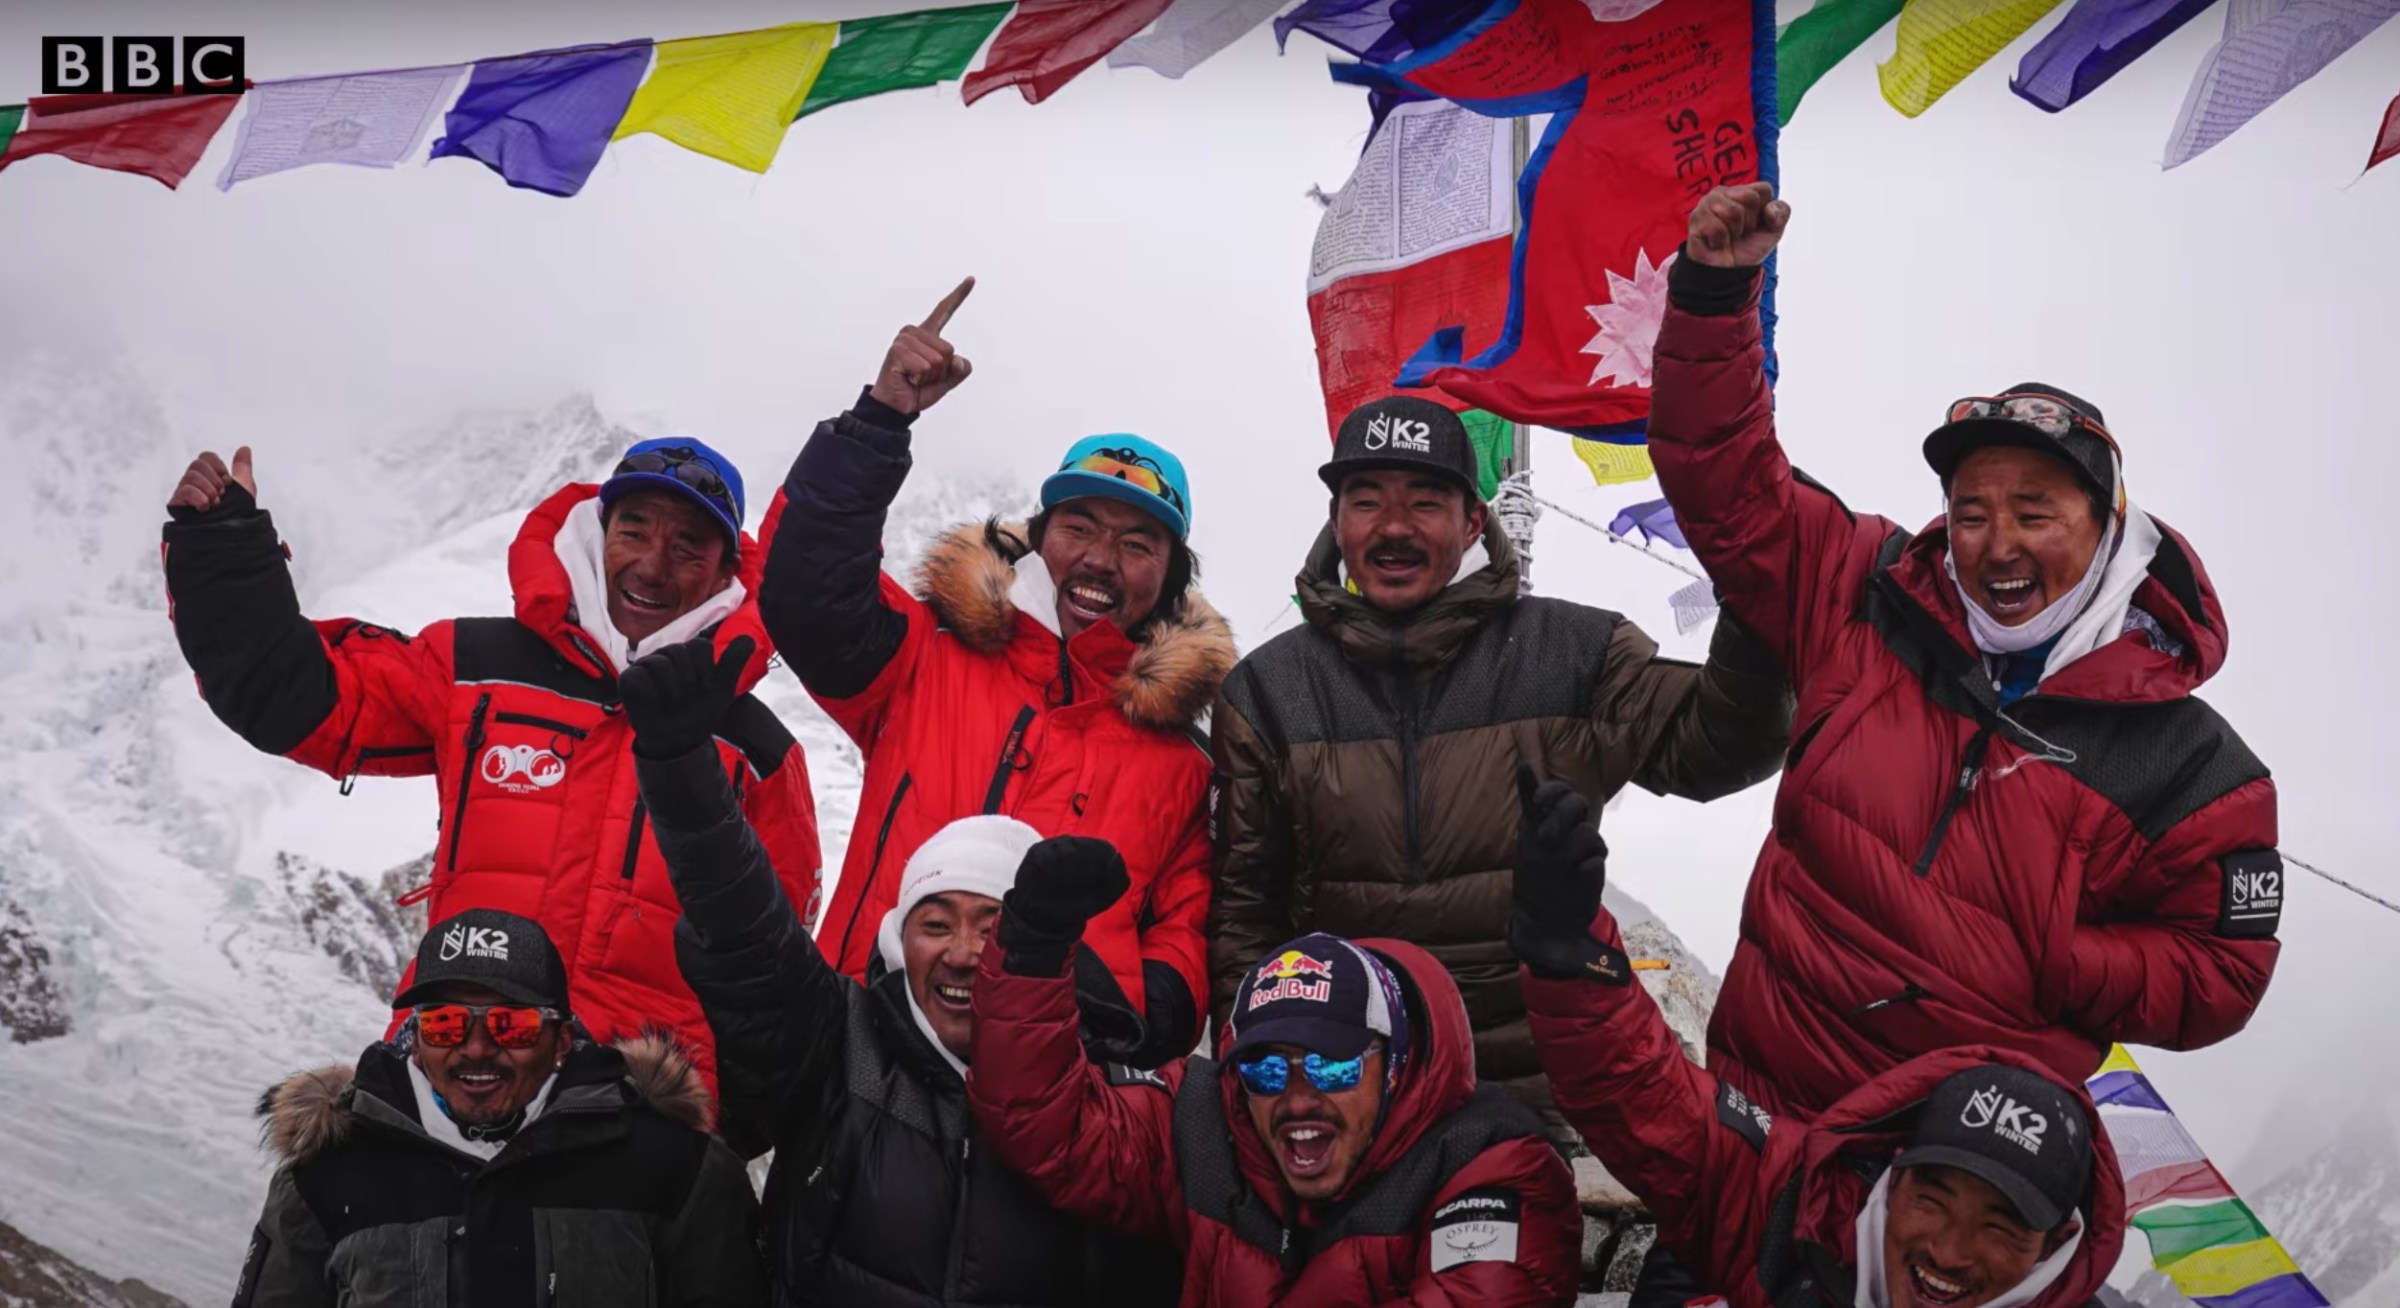 Eight of the 10 people that reached the top of K2.